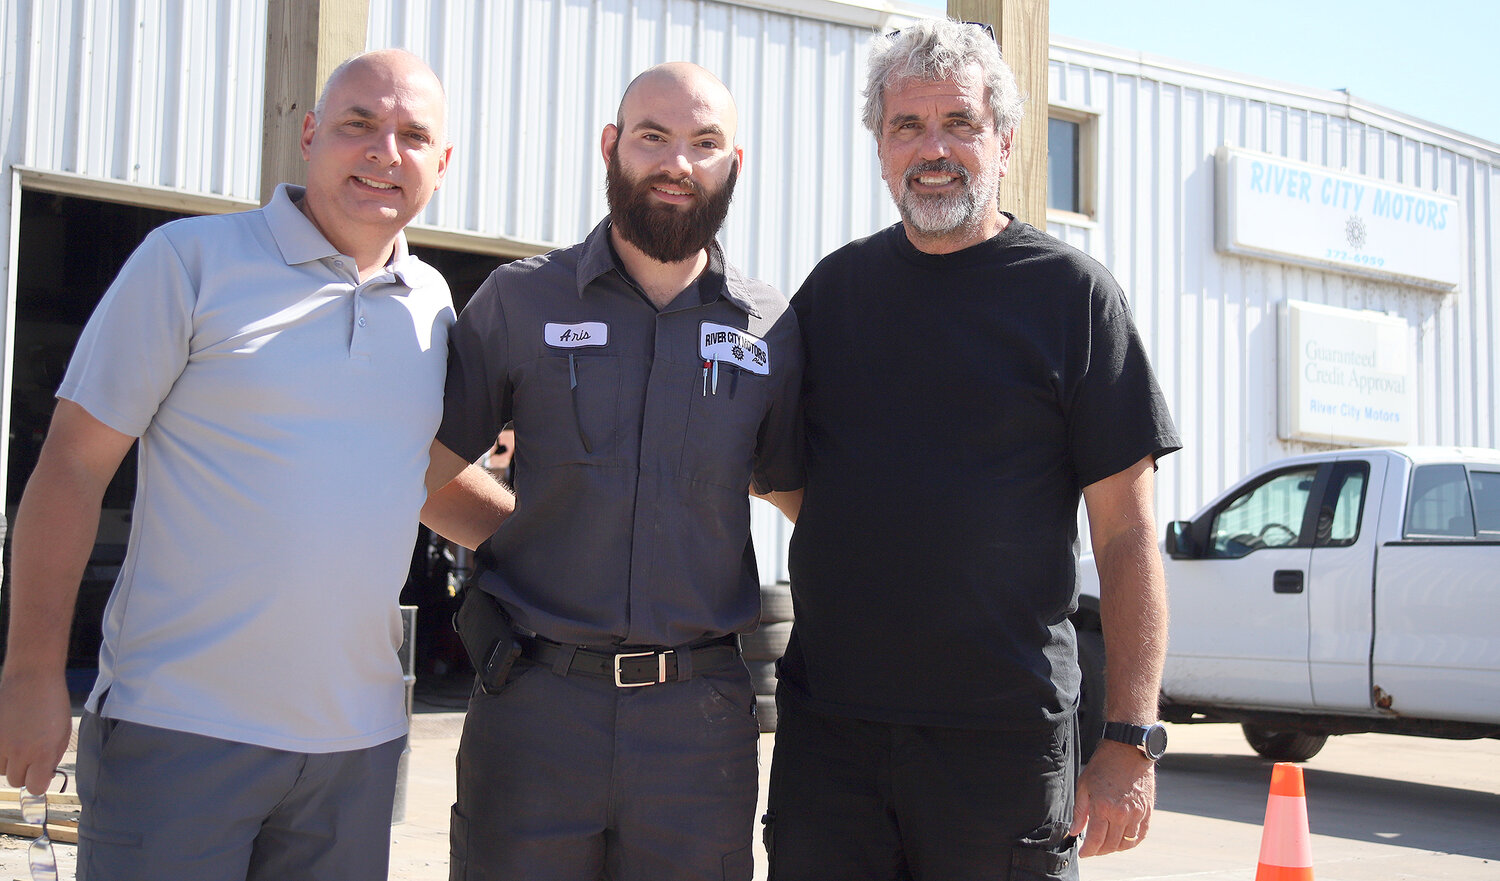 From left to right: Mark Cox, Aris Cox, and Chris Greenwald have entered into a five-year partnership at River City Motors Plus. After five years, the Cox family will take ownership of the business. In the meantime, they are adding a body shop service to the dealership.